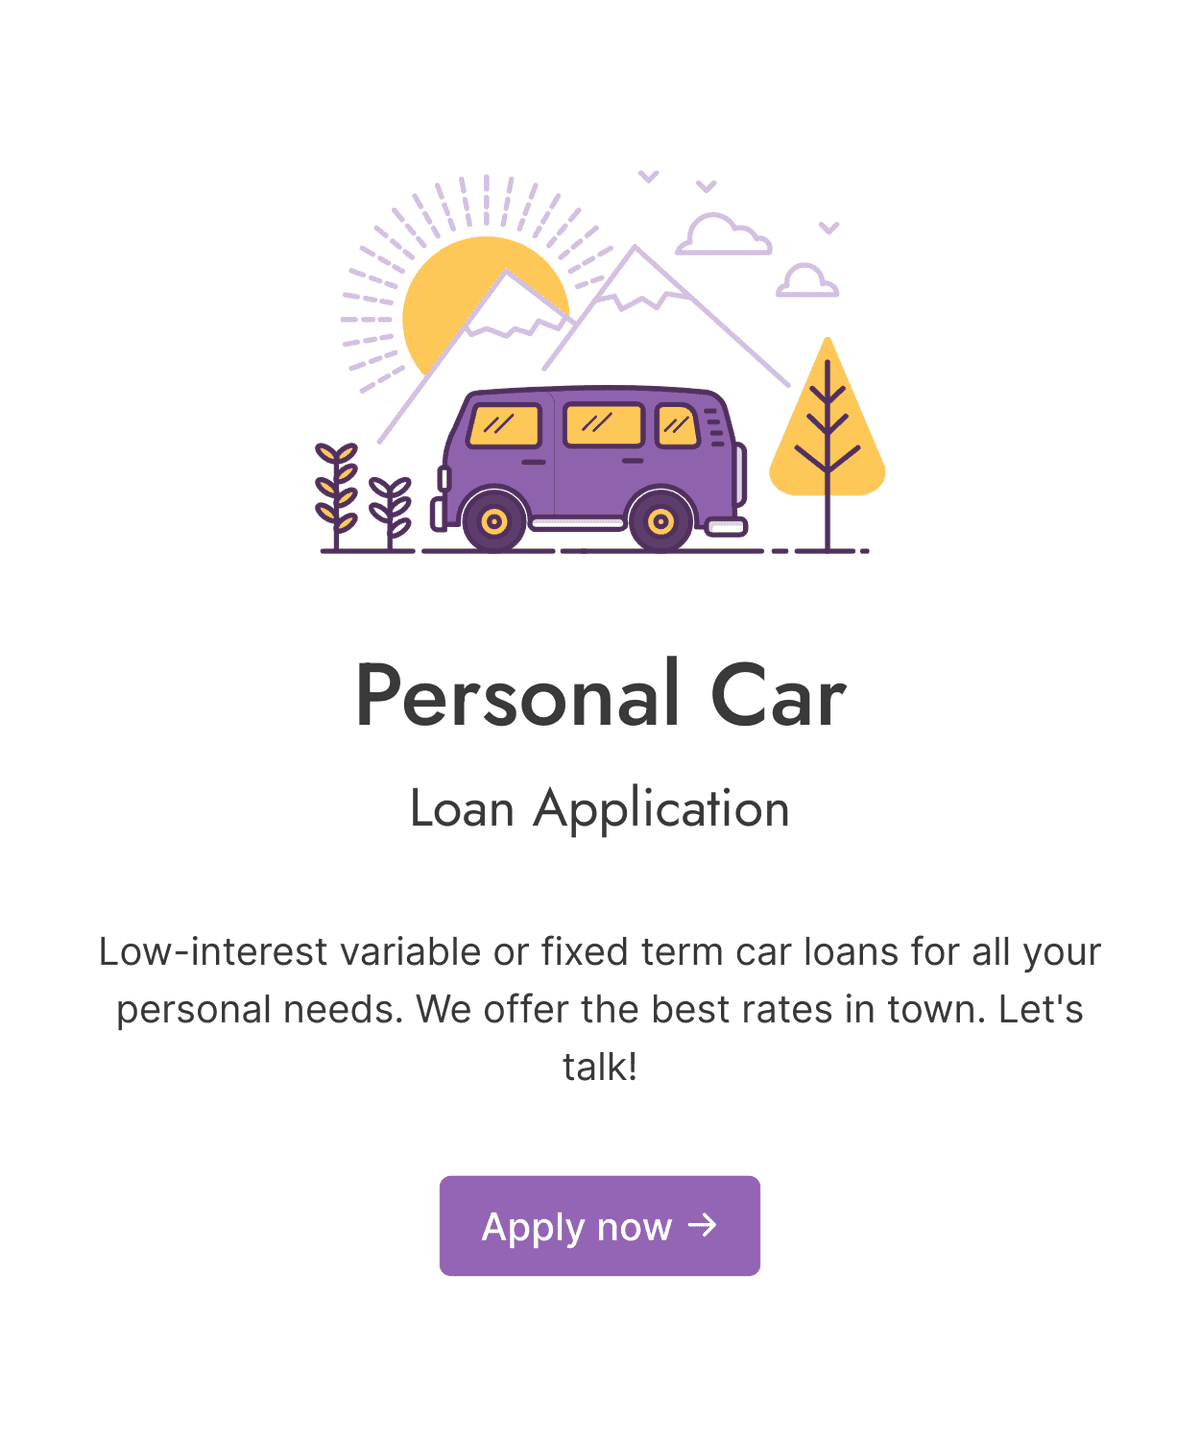 Welcome step of 'Car loan application form' with an image, introduction text, and a 'Apply now' button